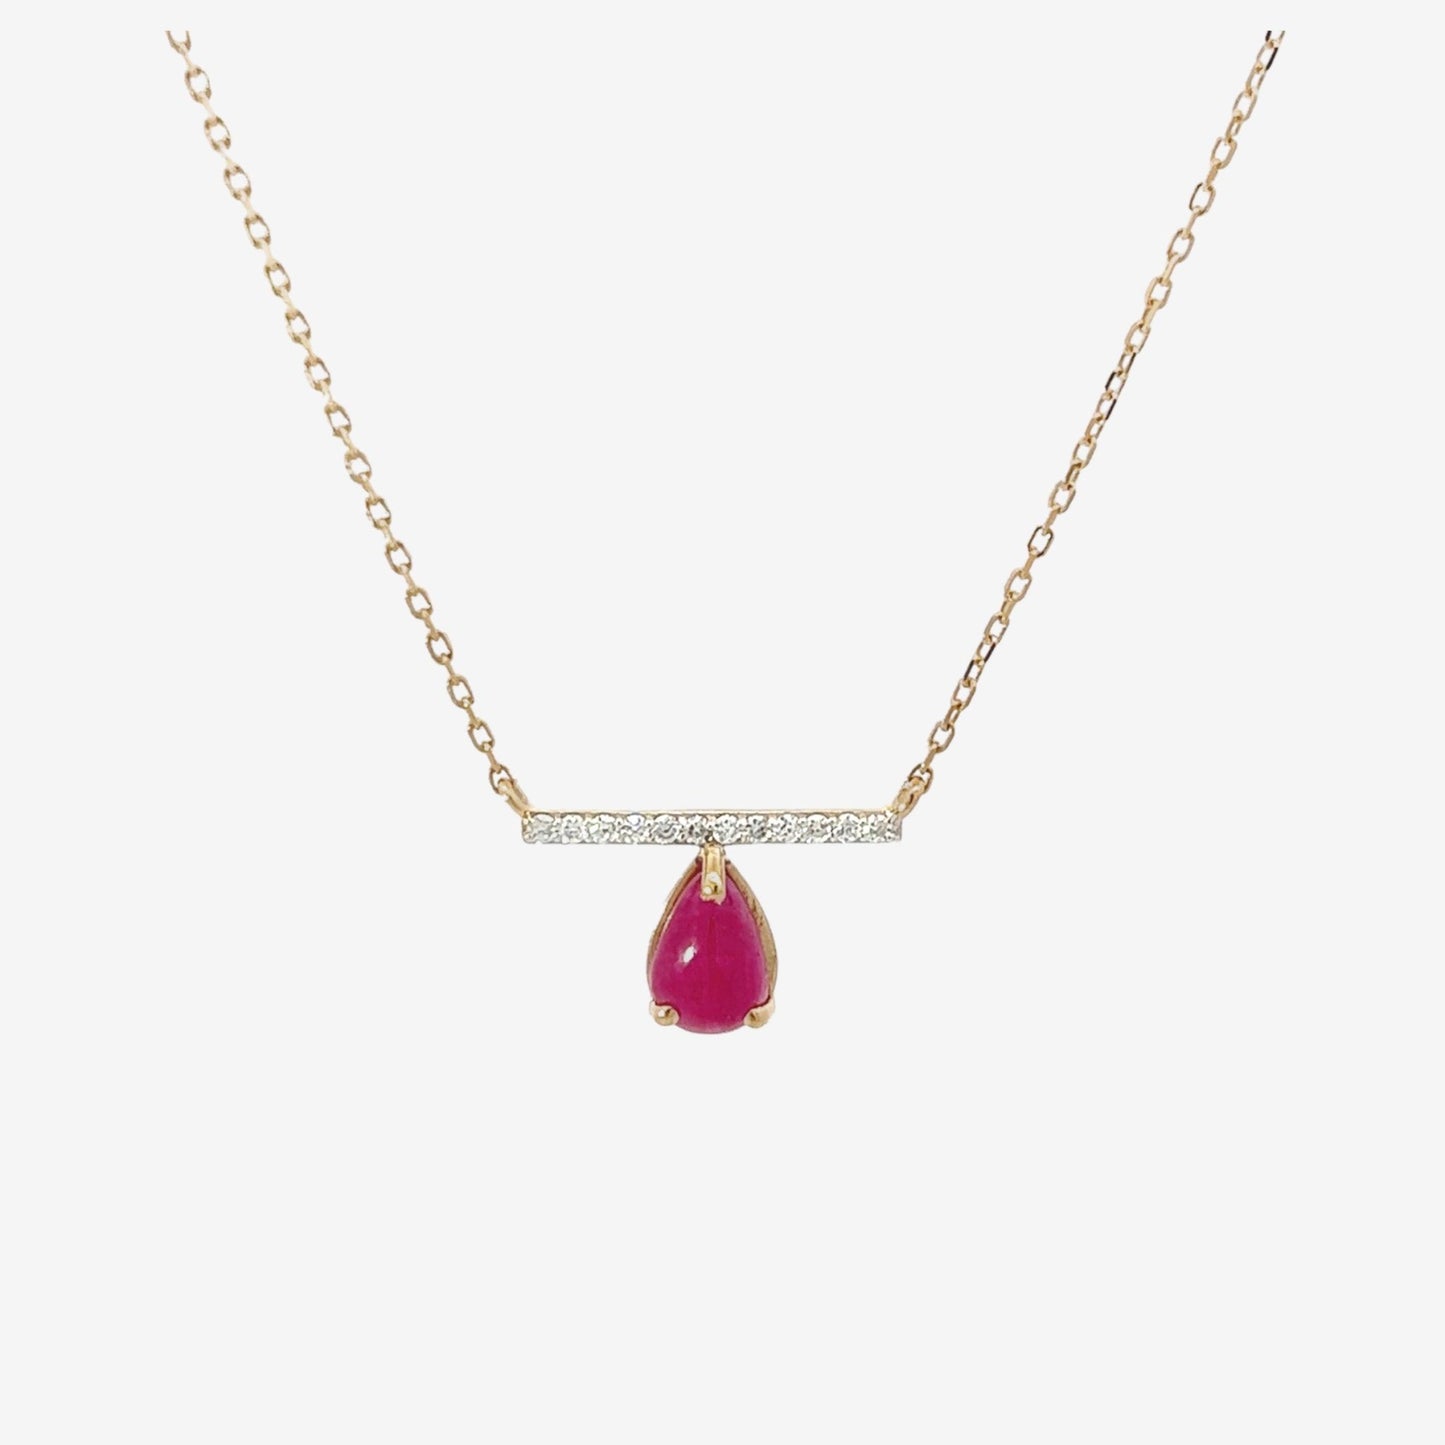 Lia Necklace in Diamond and Ruby - 18k Gold - Lynor